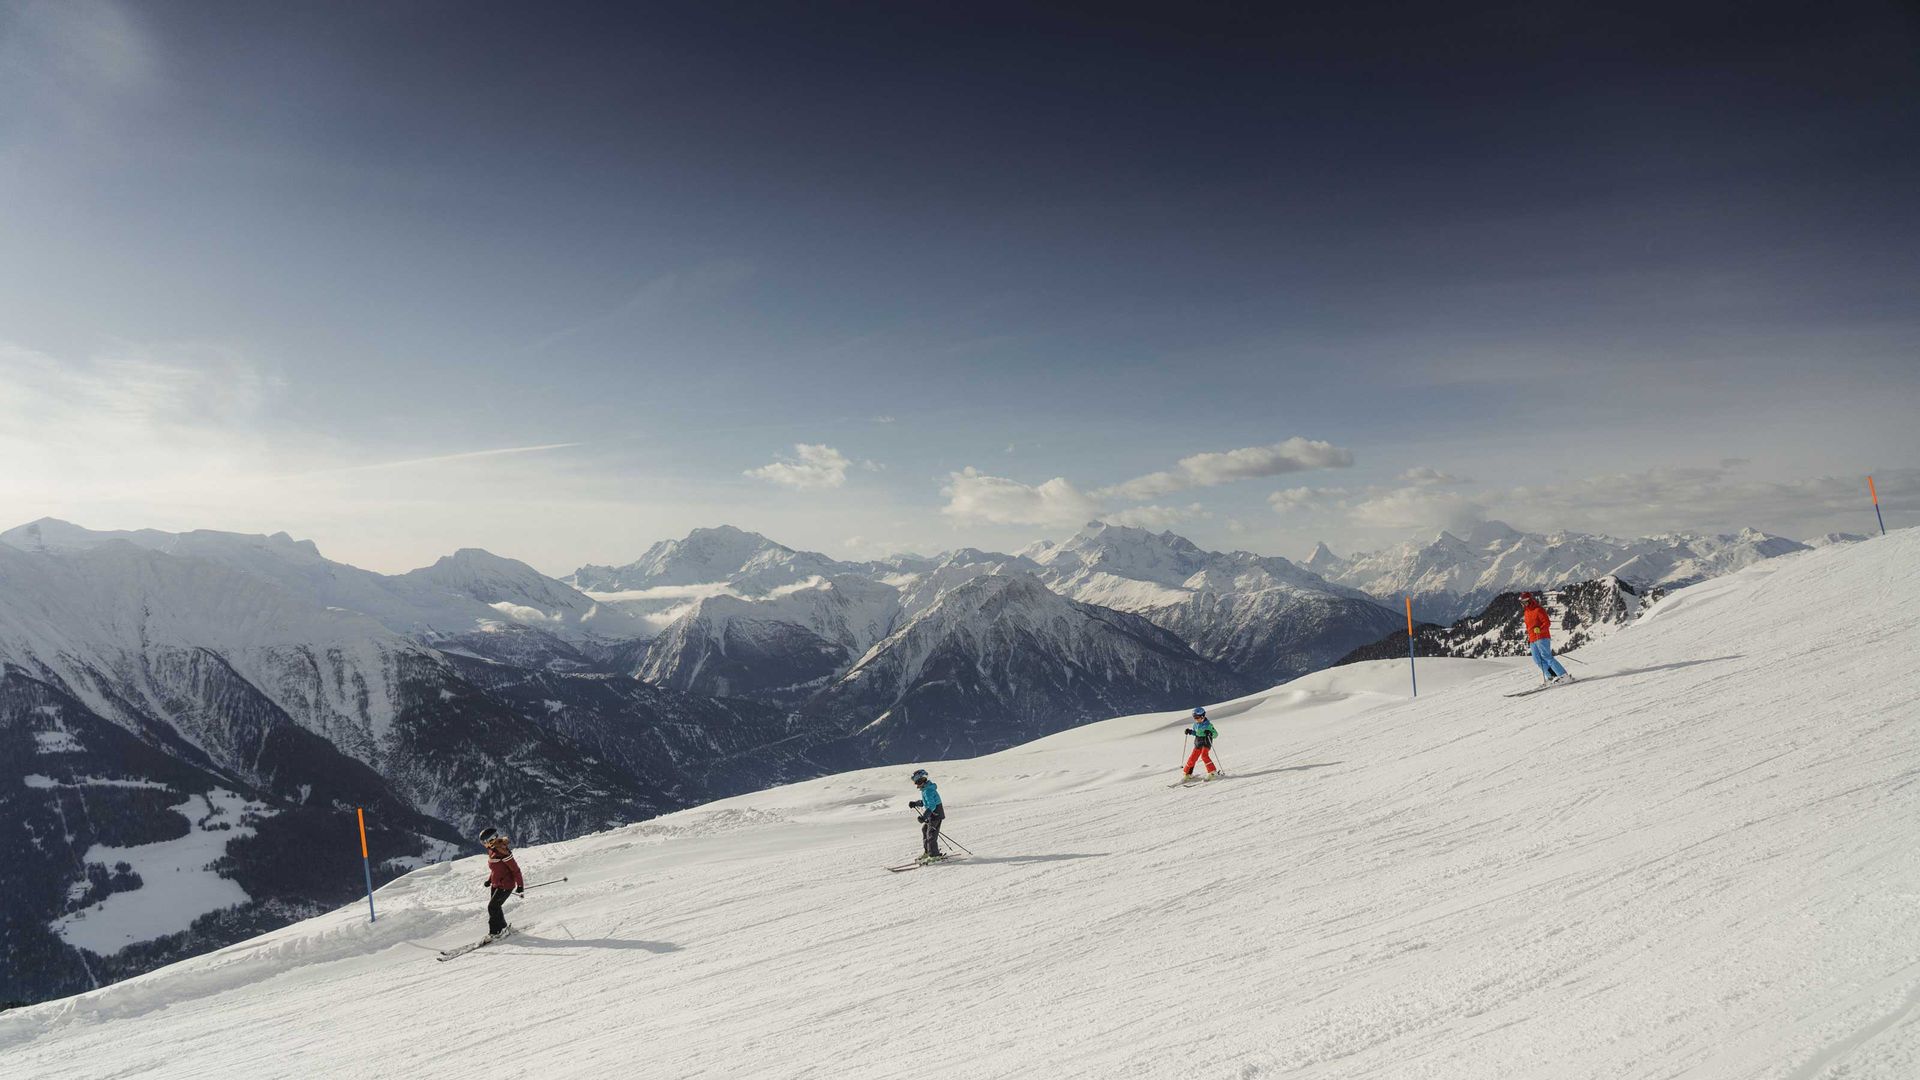 A family skiing on perfectly groomed pistes under a bright blue sky